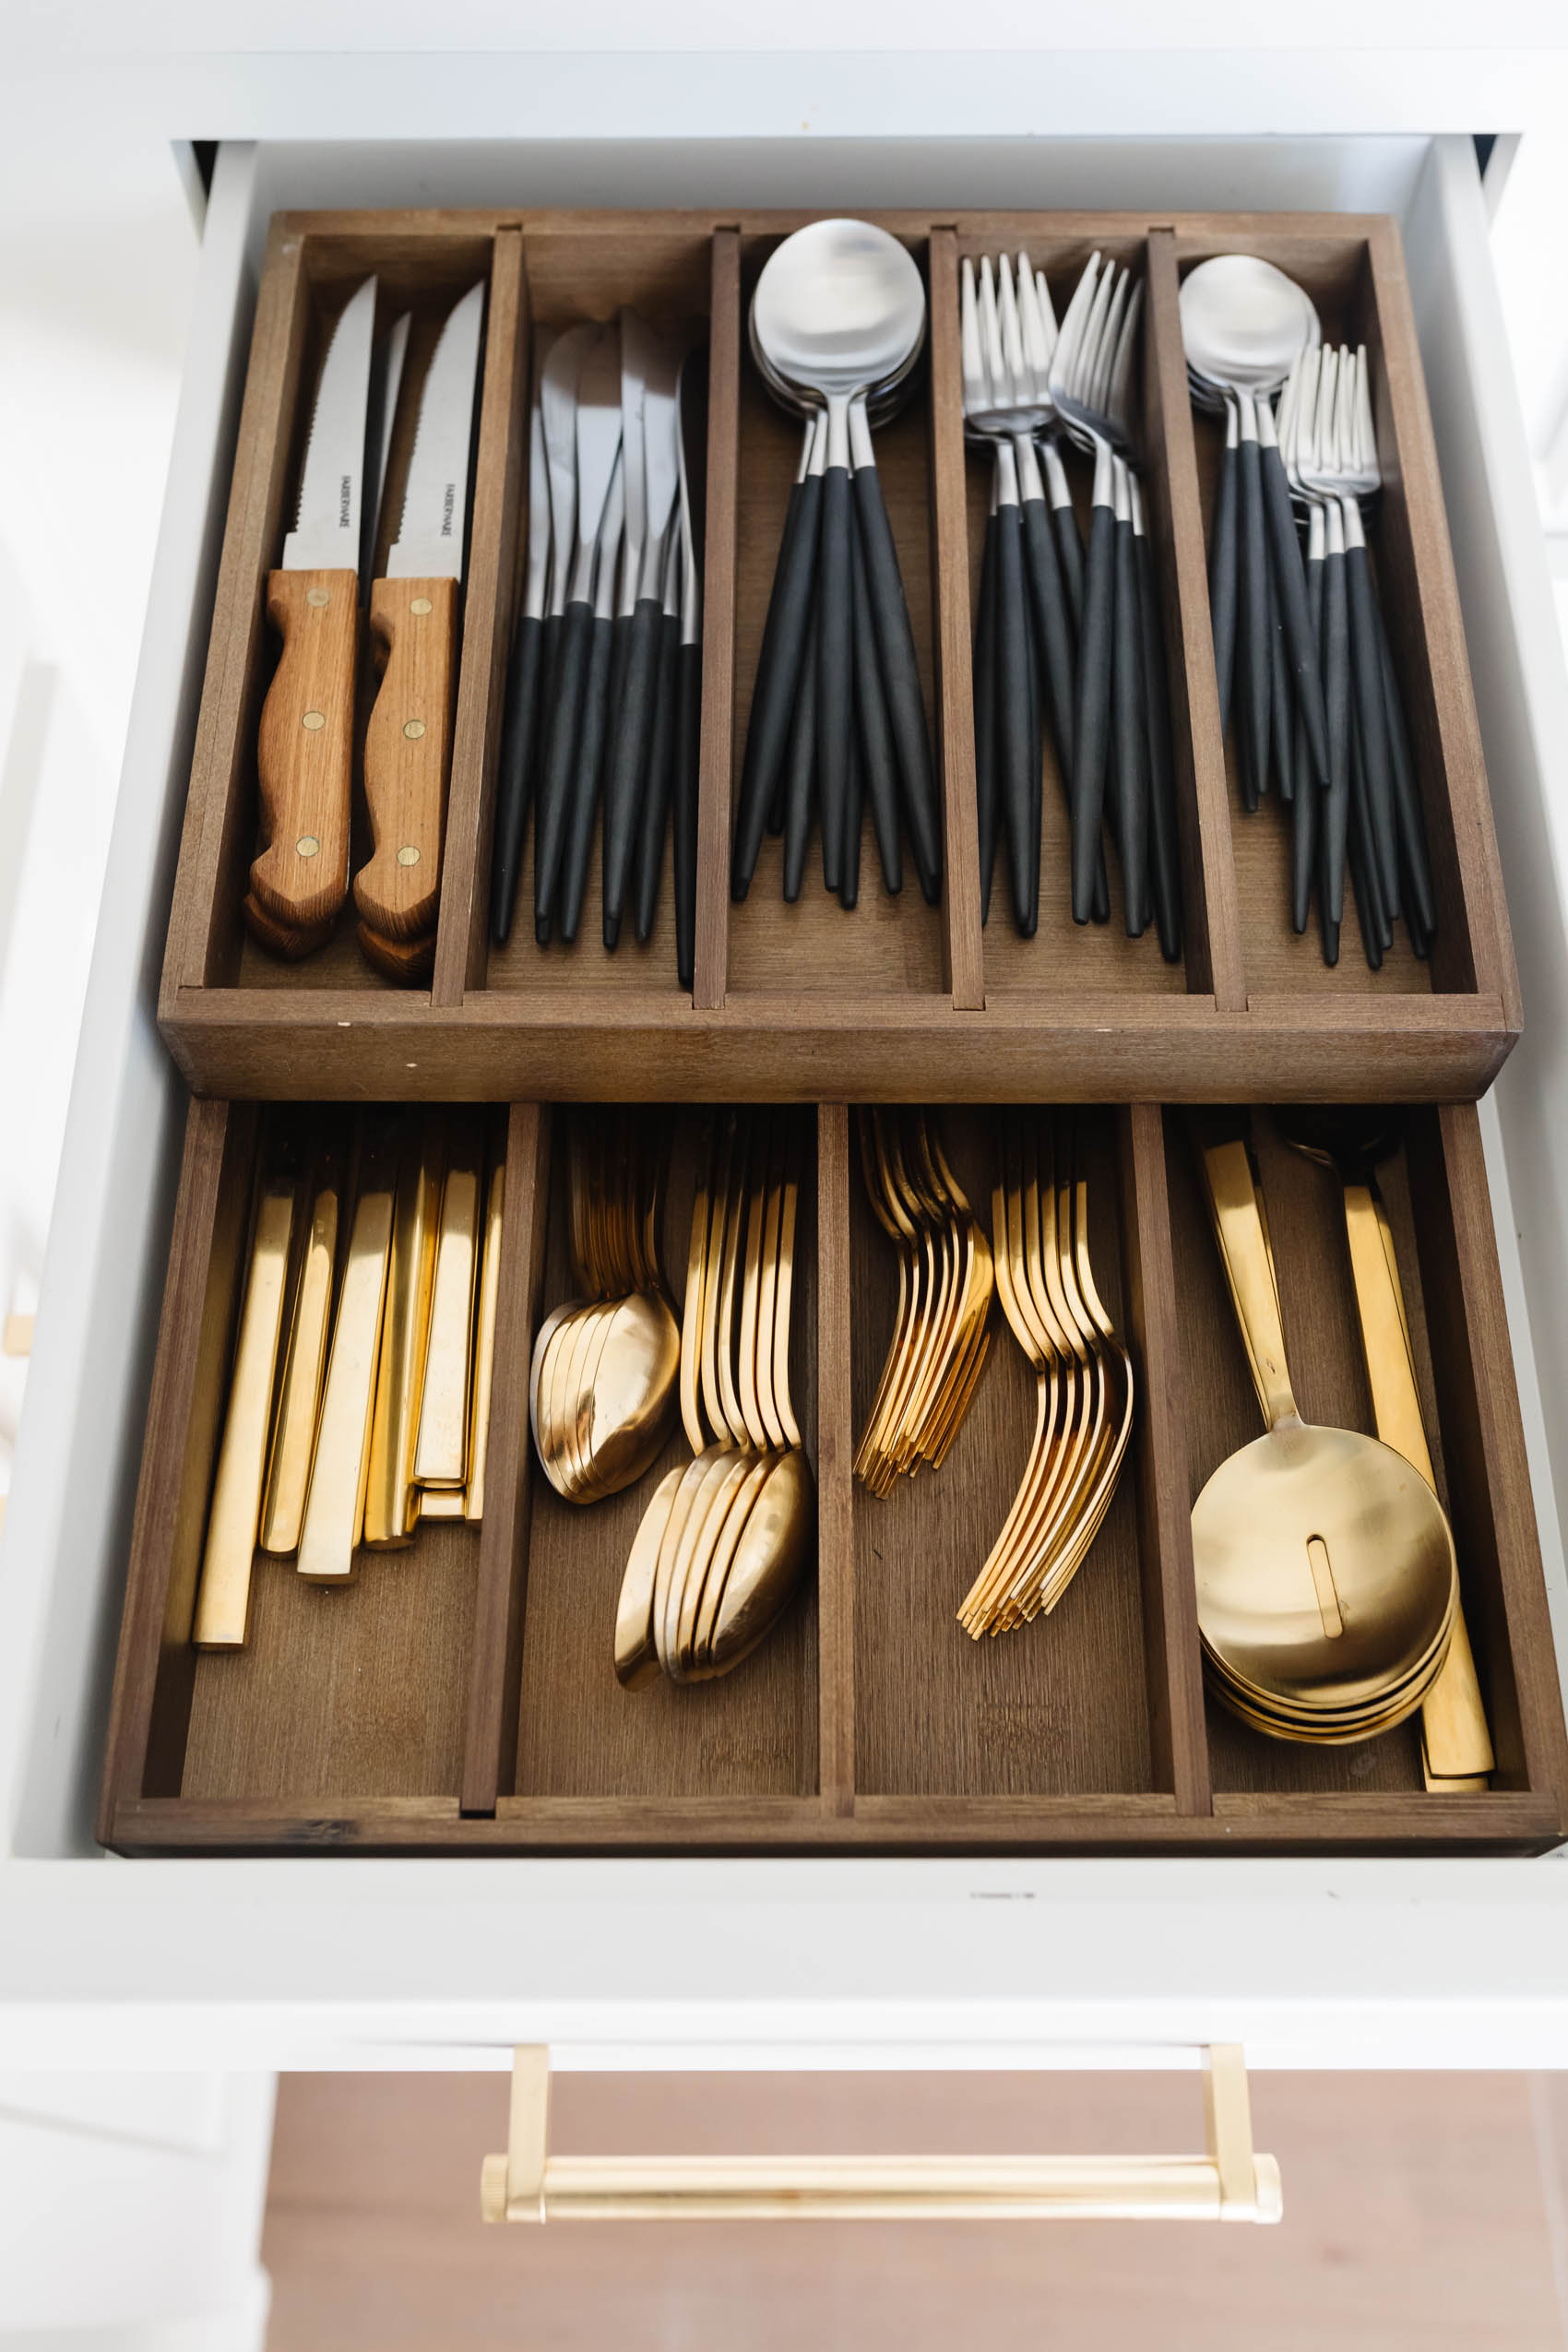 Kitchen Organization Tips (ideas & favorite products!) - Artsy Chicks Rule®